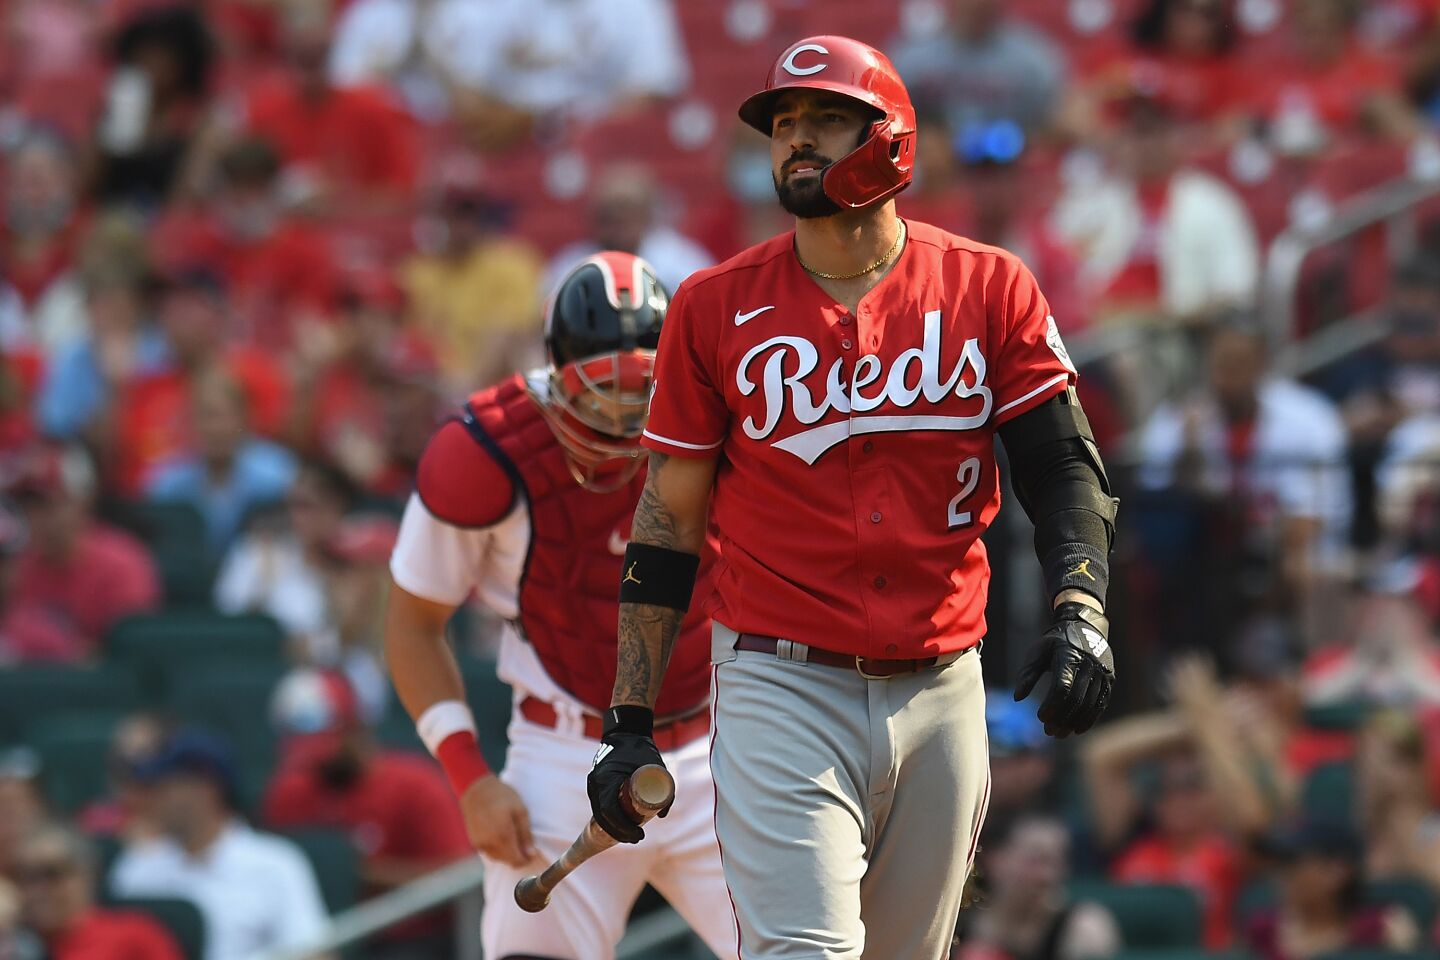 15 | Cincinnati Reds (75-69; LW: 14)The Reds, who are 4-7 during the Padres’ September struggles, don’t seem to want the playoff spot any more than sinking San Diego.